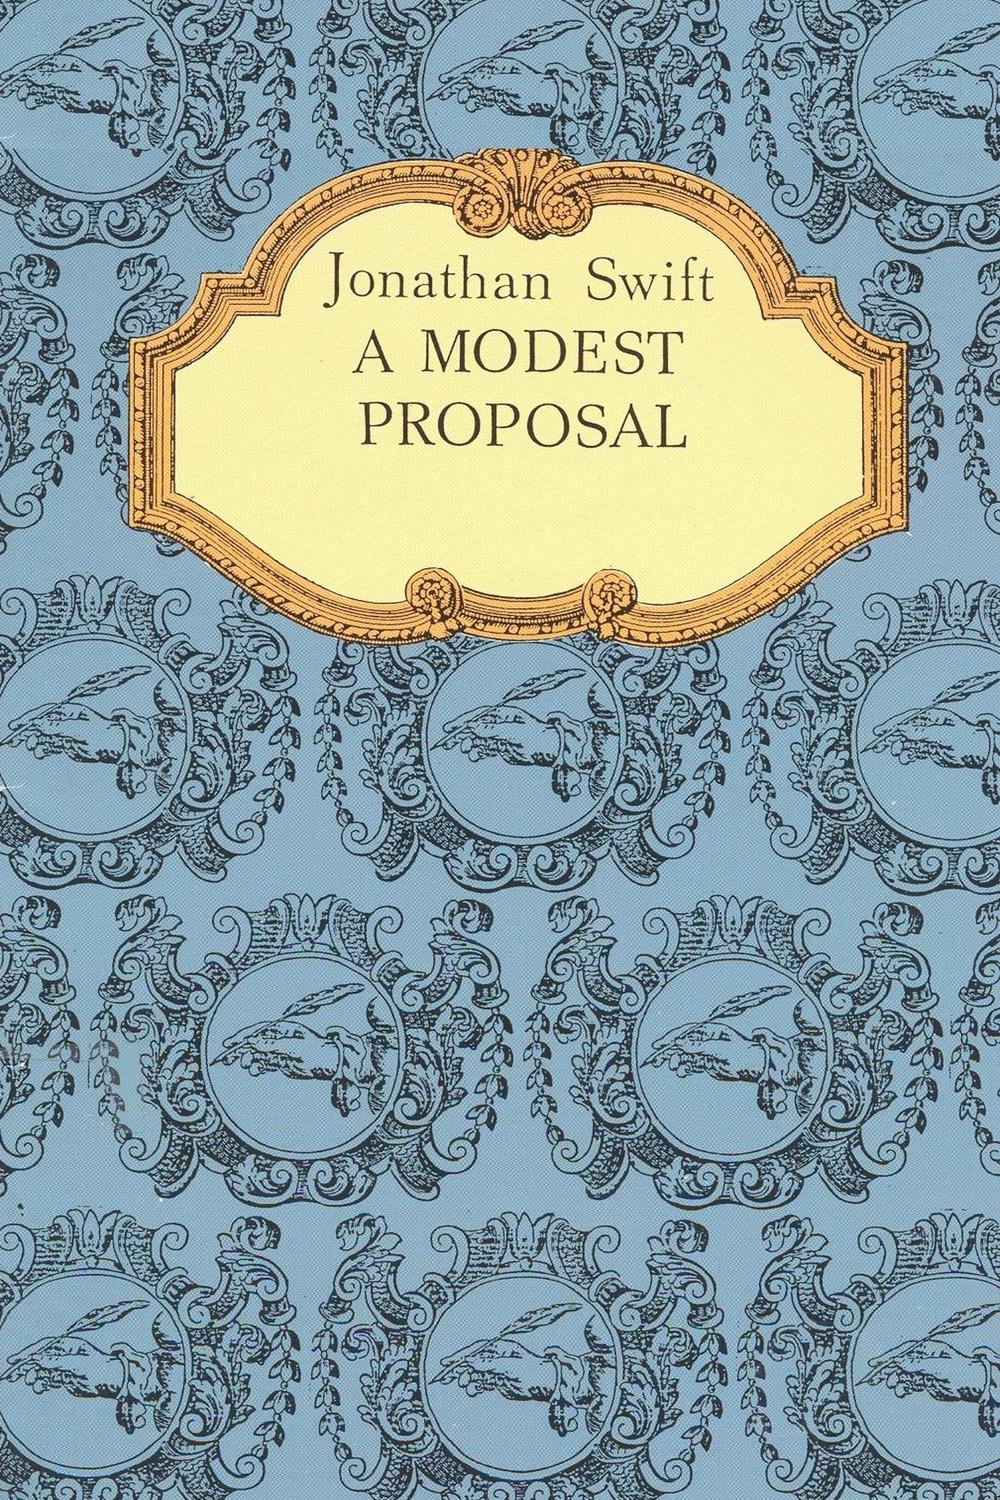 A Modest Proposal. A Modest Proposal For preventing the Children of Poor People From being a Burthen to Their Parents or Country, and For making them Beneficial to the Publick - Jonathan Swift